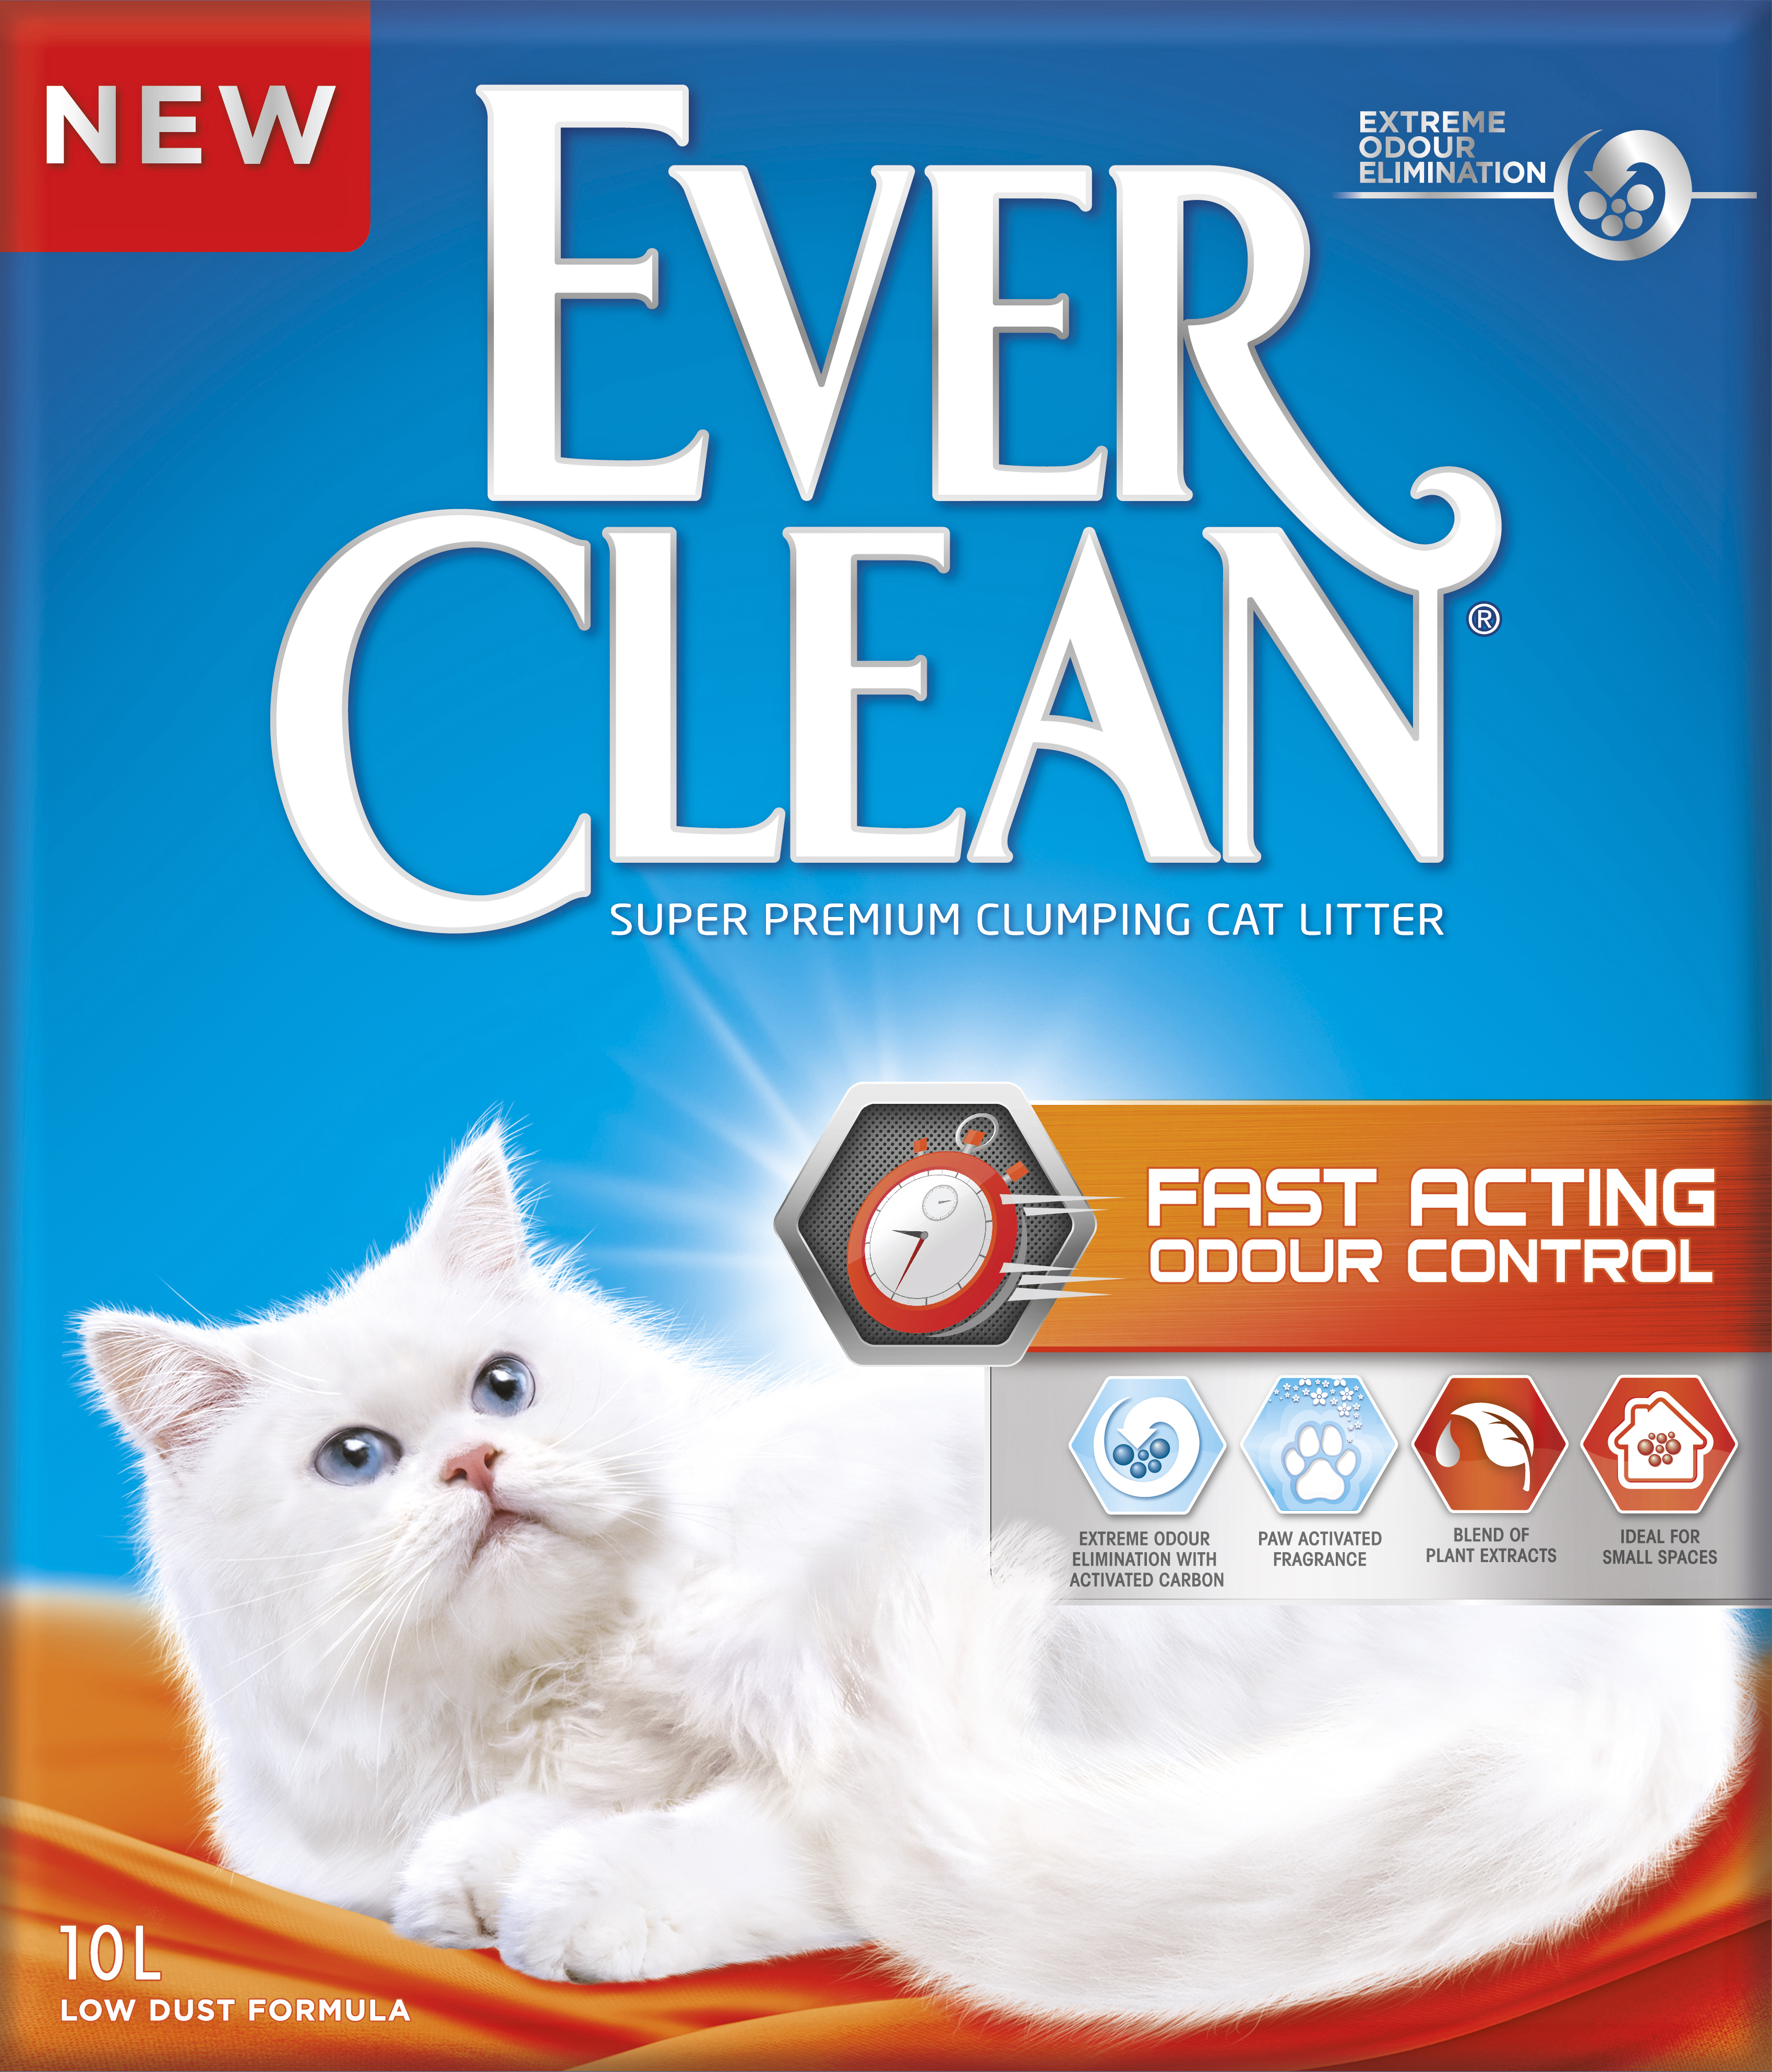 Ever clean